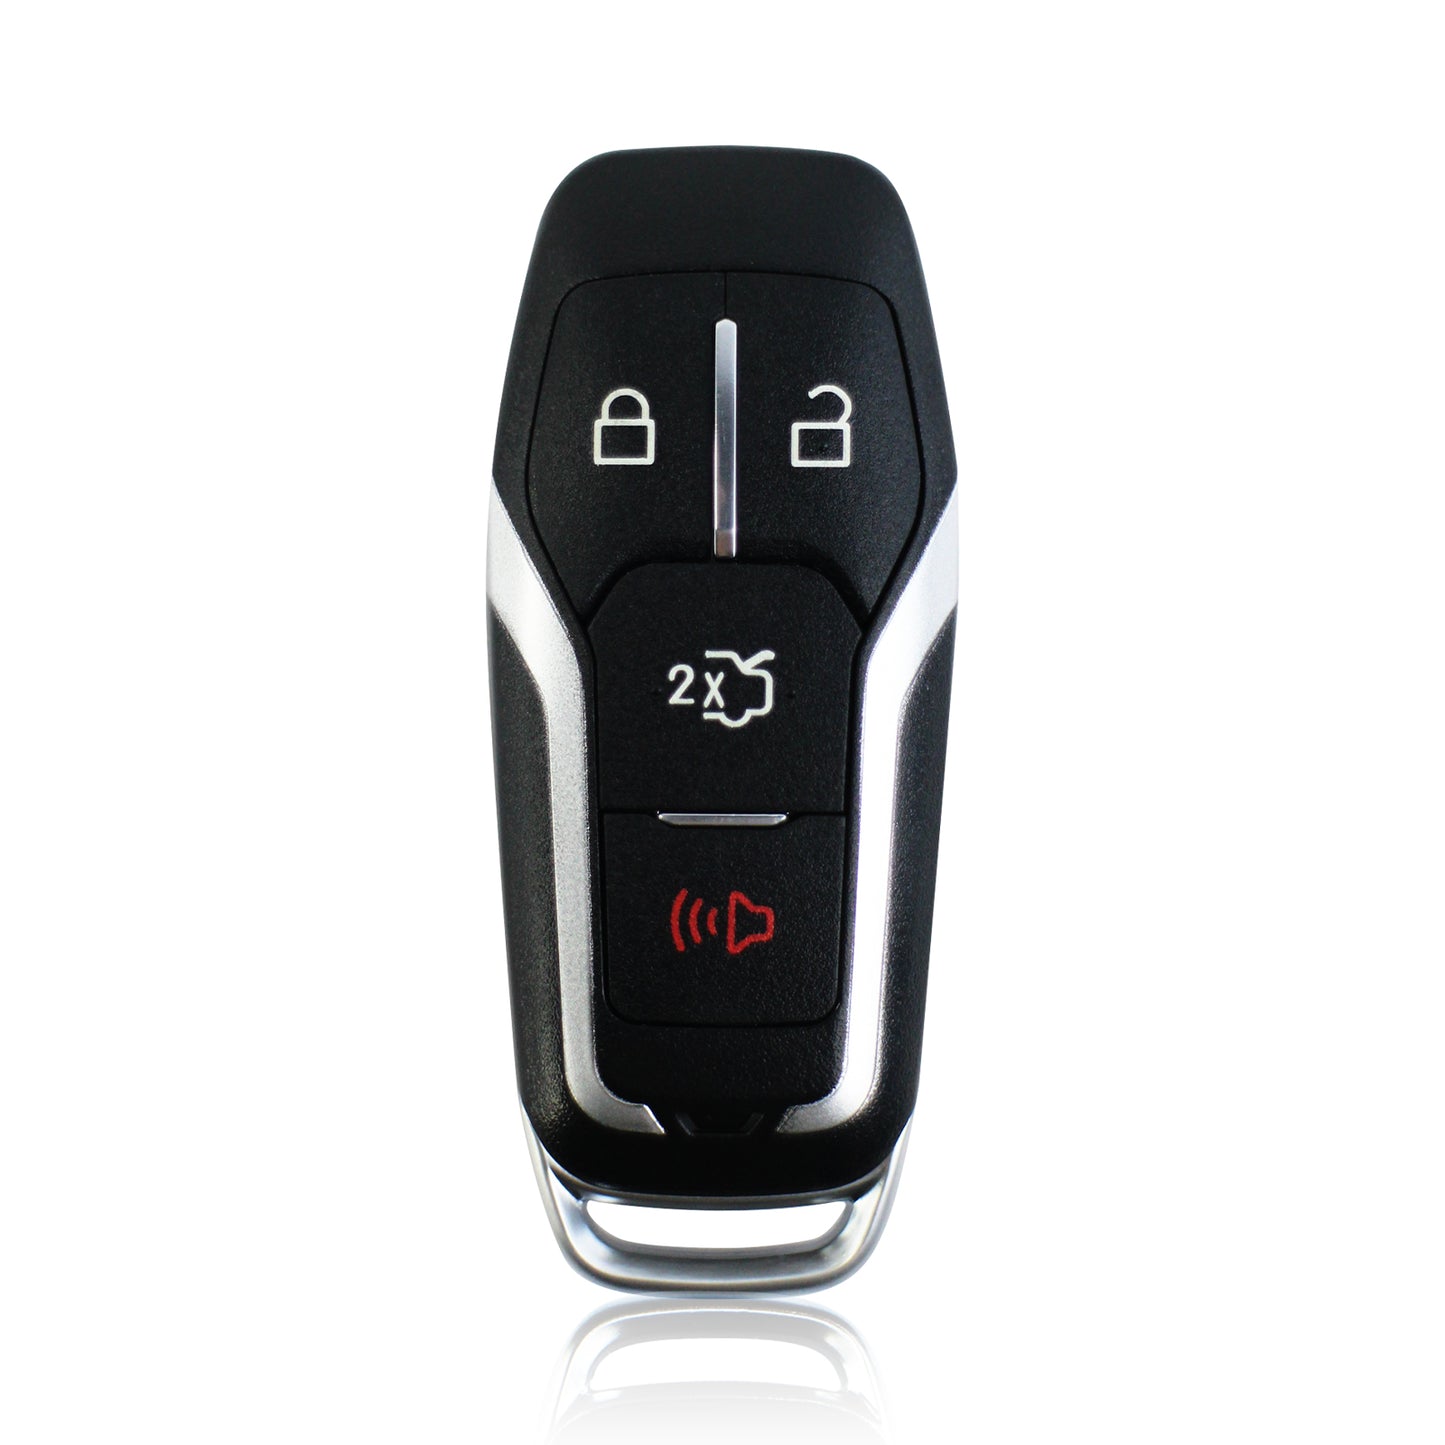 4 Buttons 315MHz Keyless Entry Fob Remote Car Key For 2015 - 2017 Ford Edge Fusion Explorer Mustang FCC ID: M3N-A2C31243800 SKU : J501